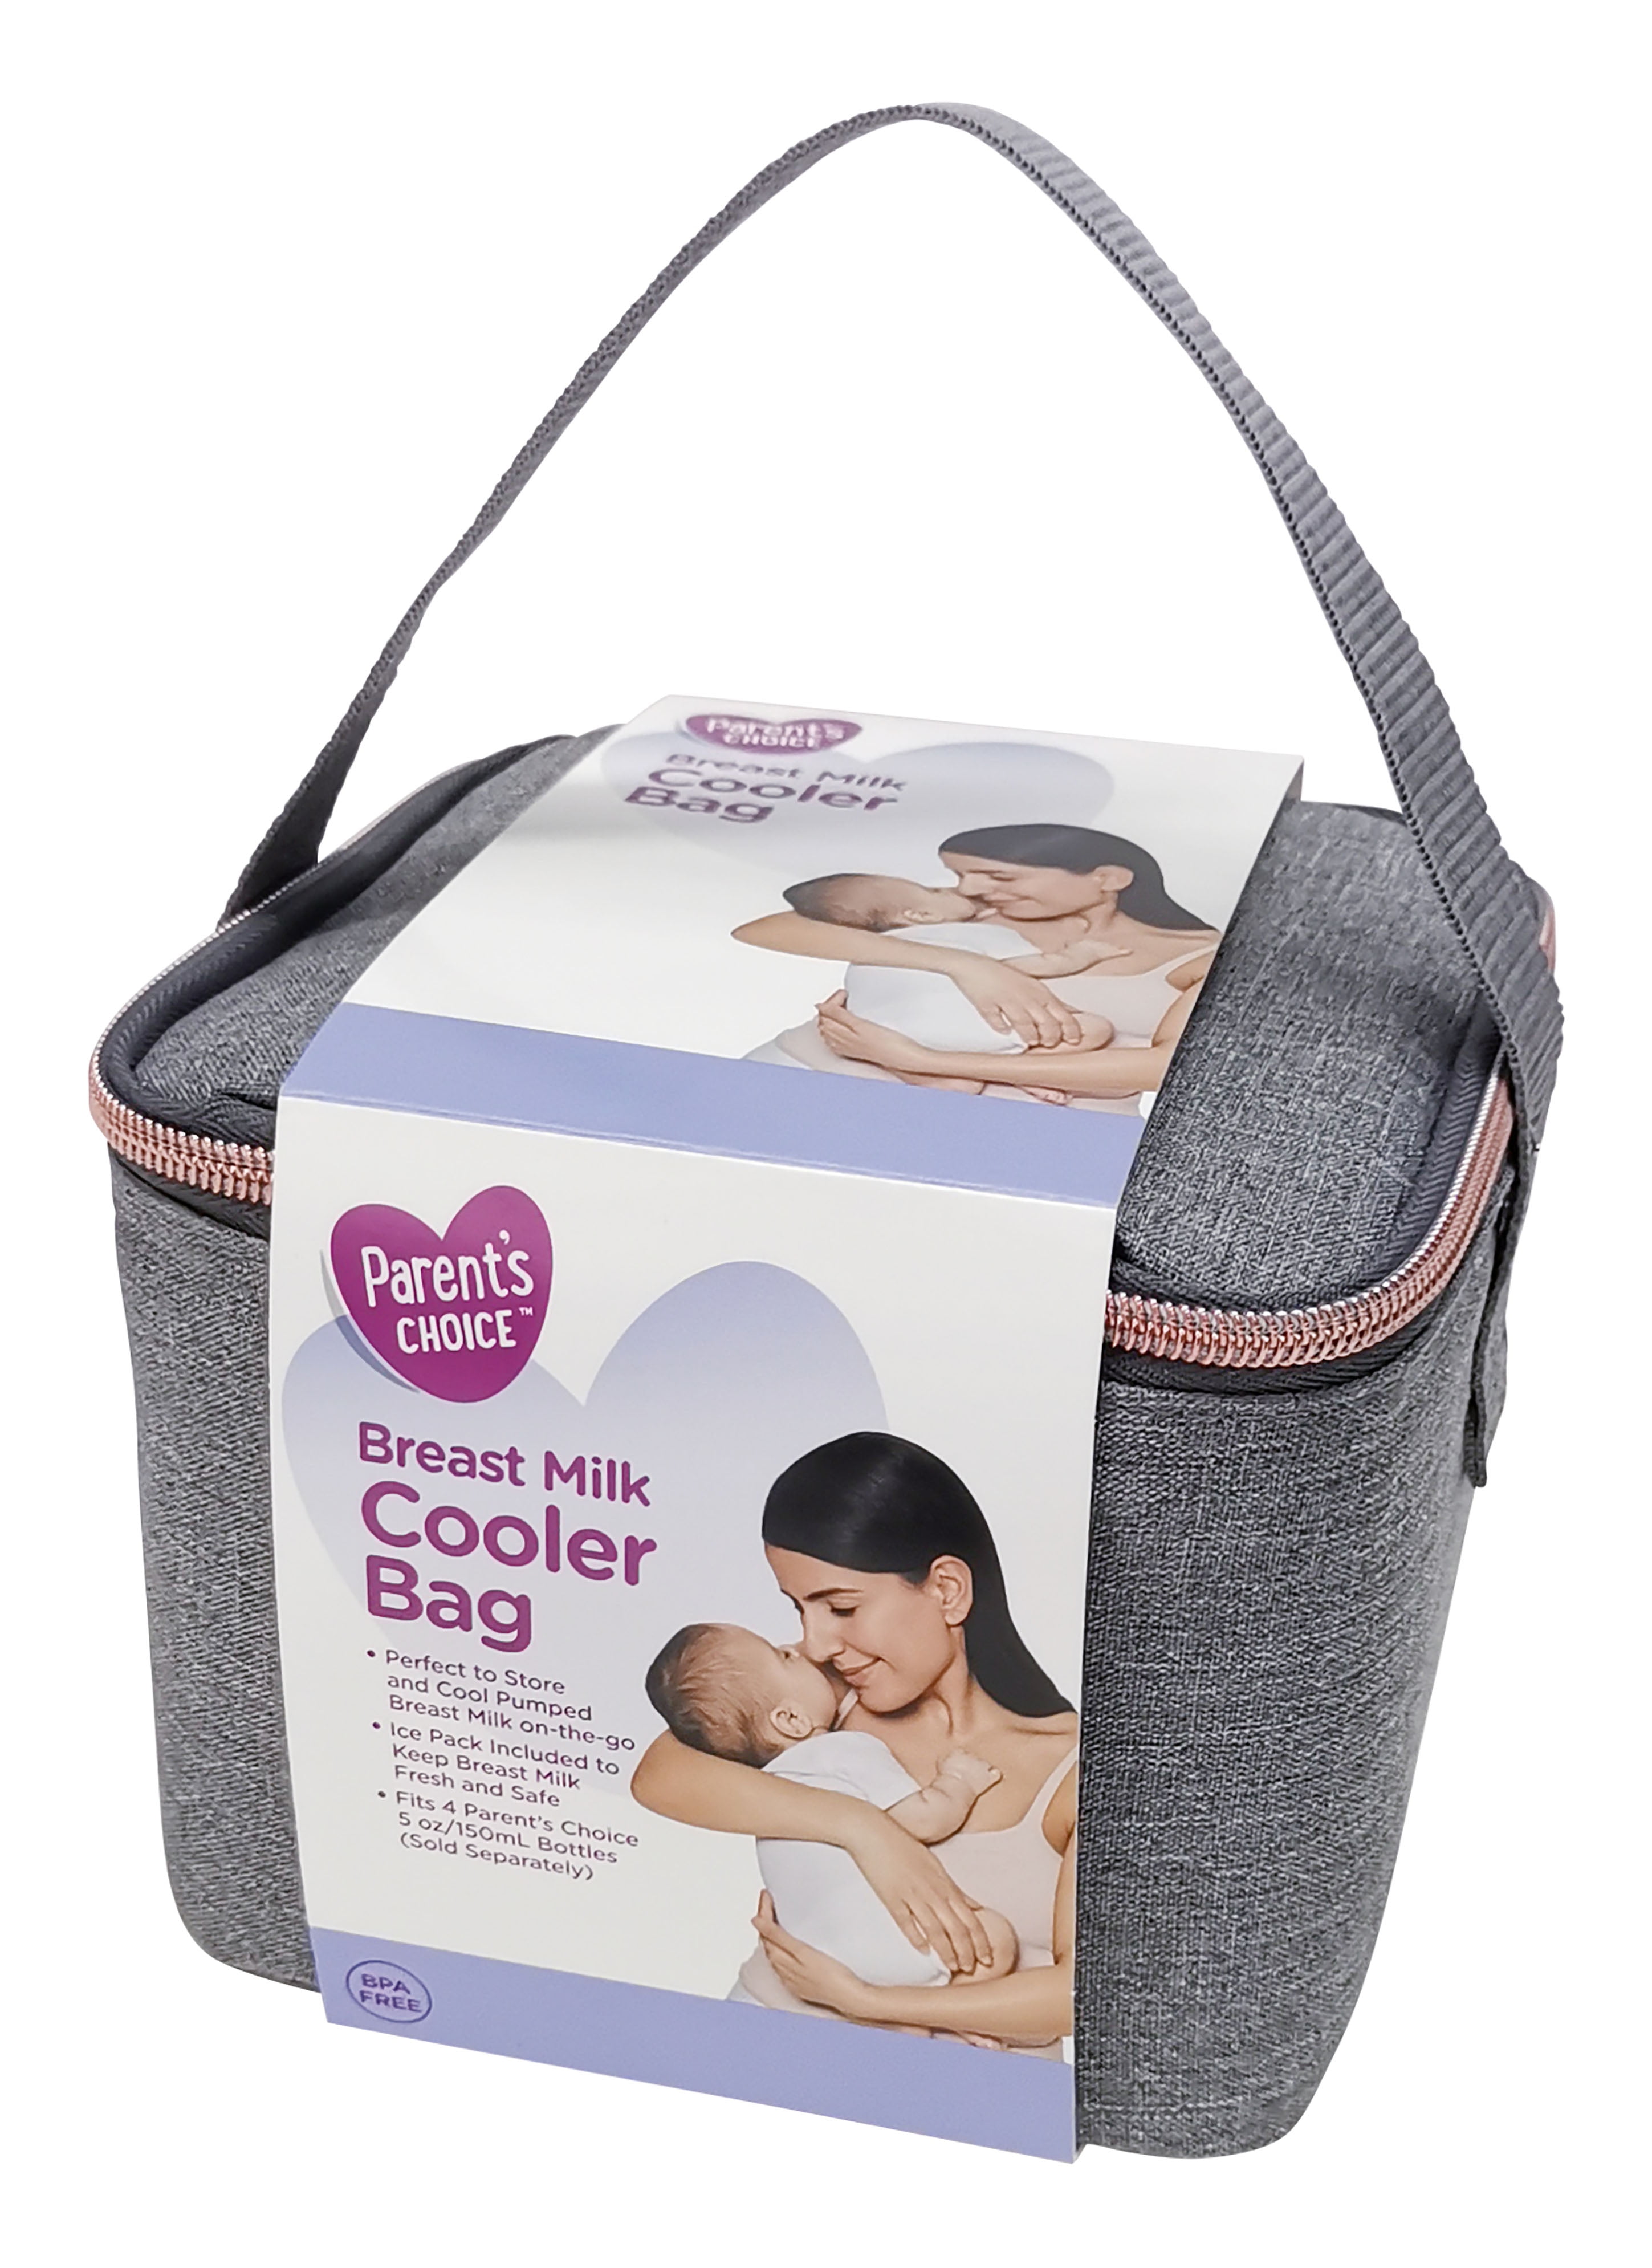 Luxja Breast Milk Cooler Bag Black Bag Only Fits 4 Bottles, Up to 150 ml Double-Layer Baby Bottle Cooler Bag for Breast Milk and Bottle Set 